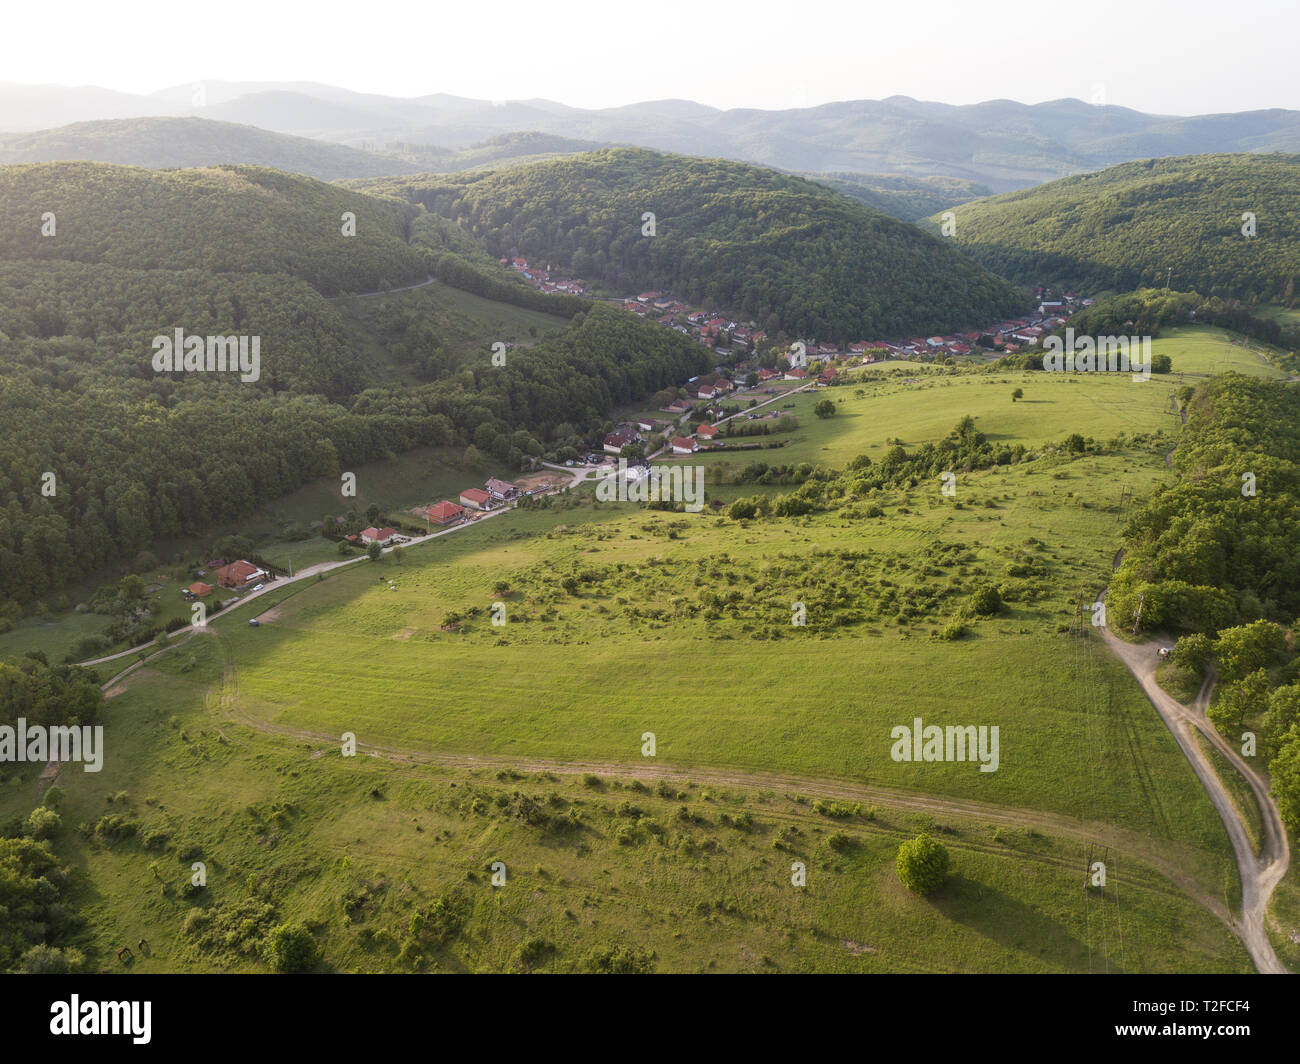 Aerial view to village in Bukk Mountains National Park, Hungary Stock Photo